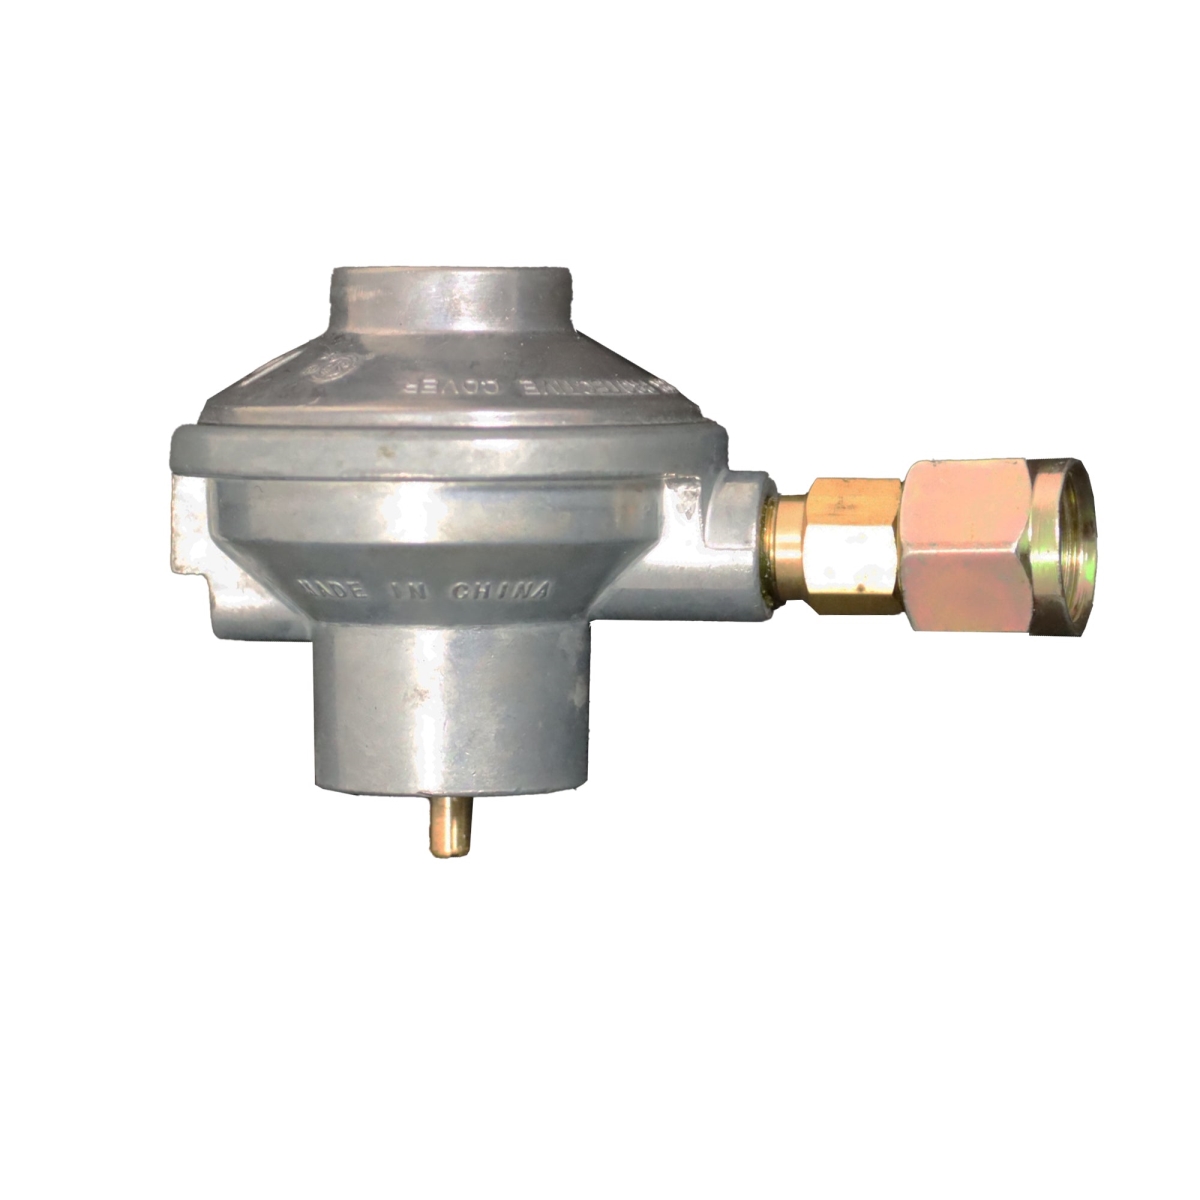 Picture of Magma Products 10775 Crossover LPG Low Pressure Regulator